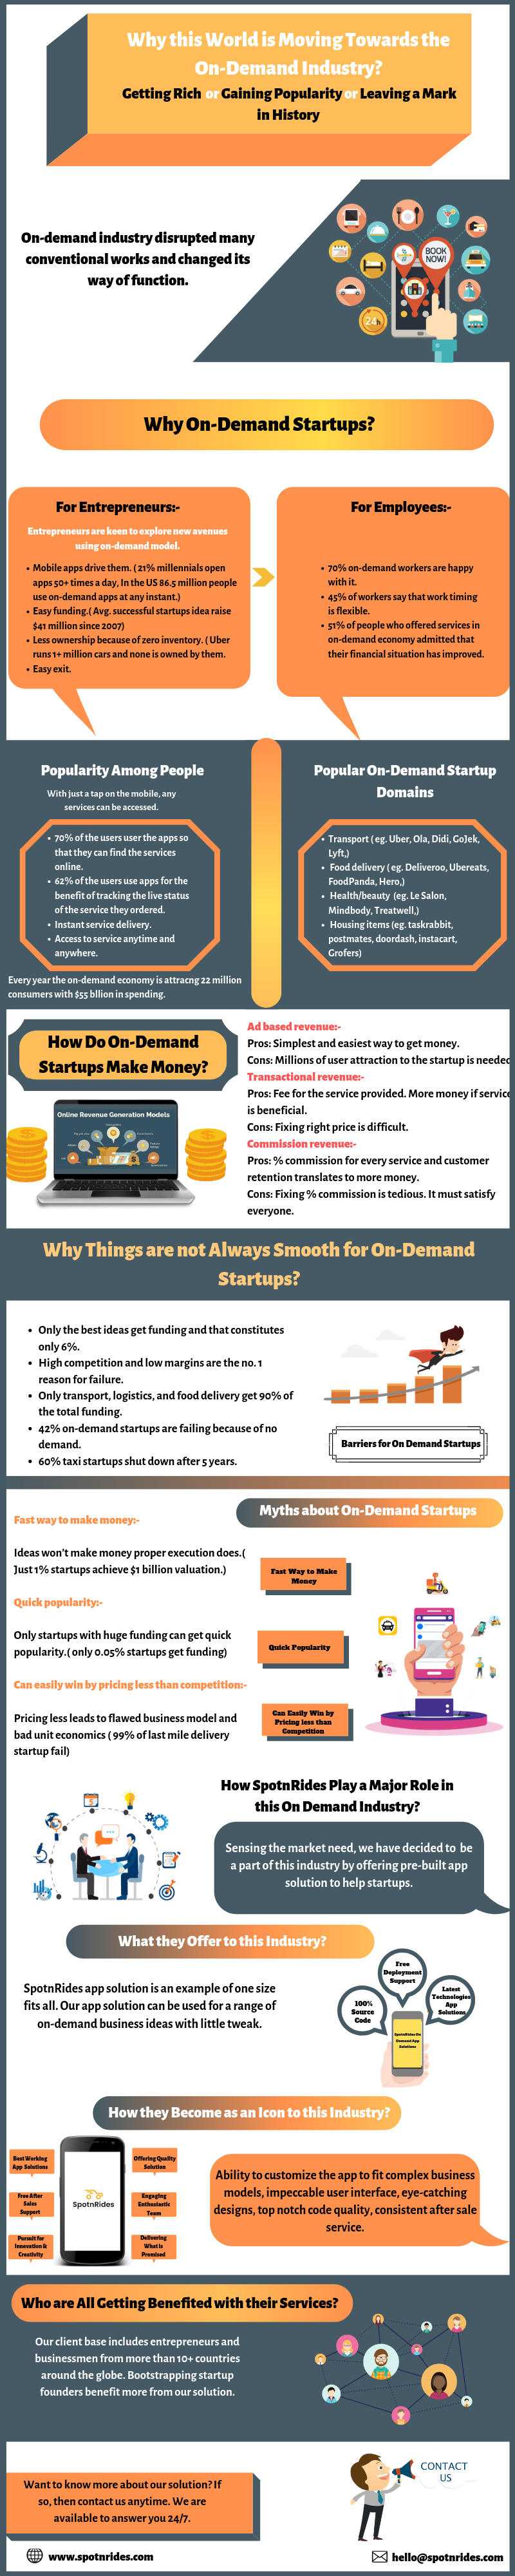 World Is Moving Towards The On Demand Industry Infographic 1, Industry Today